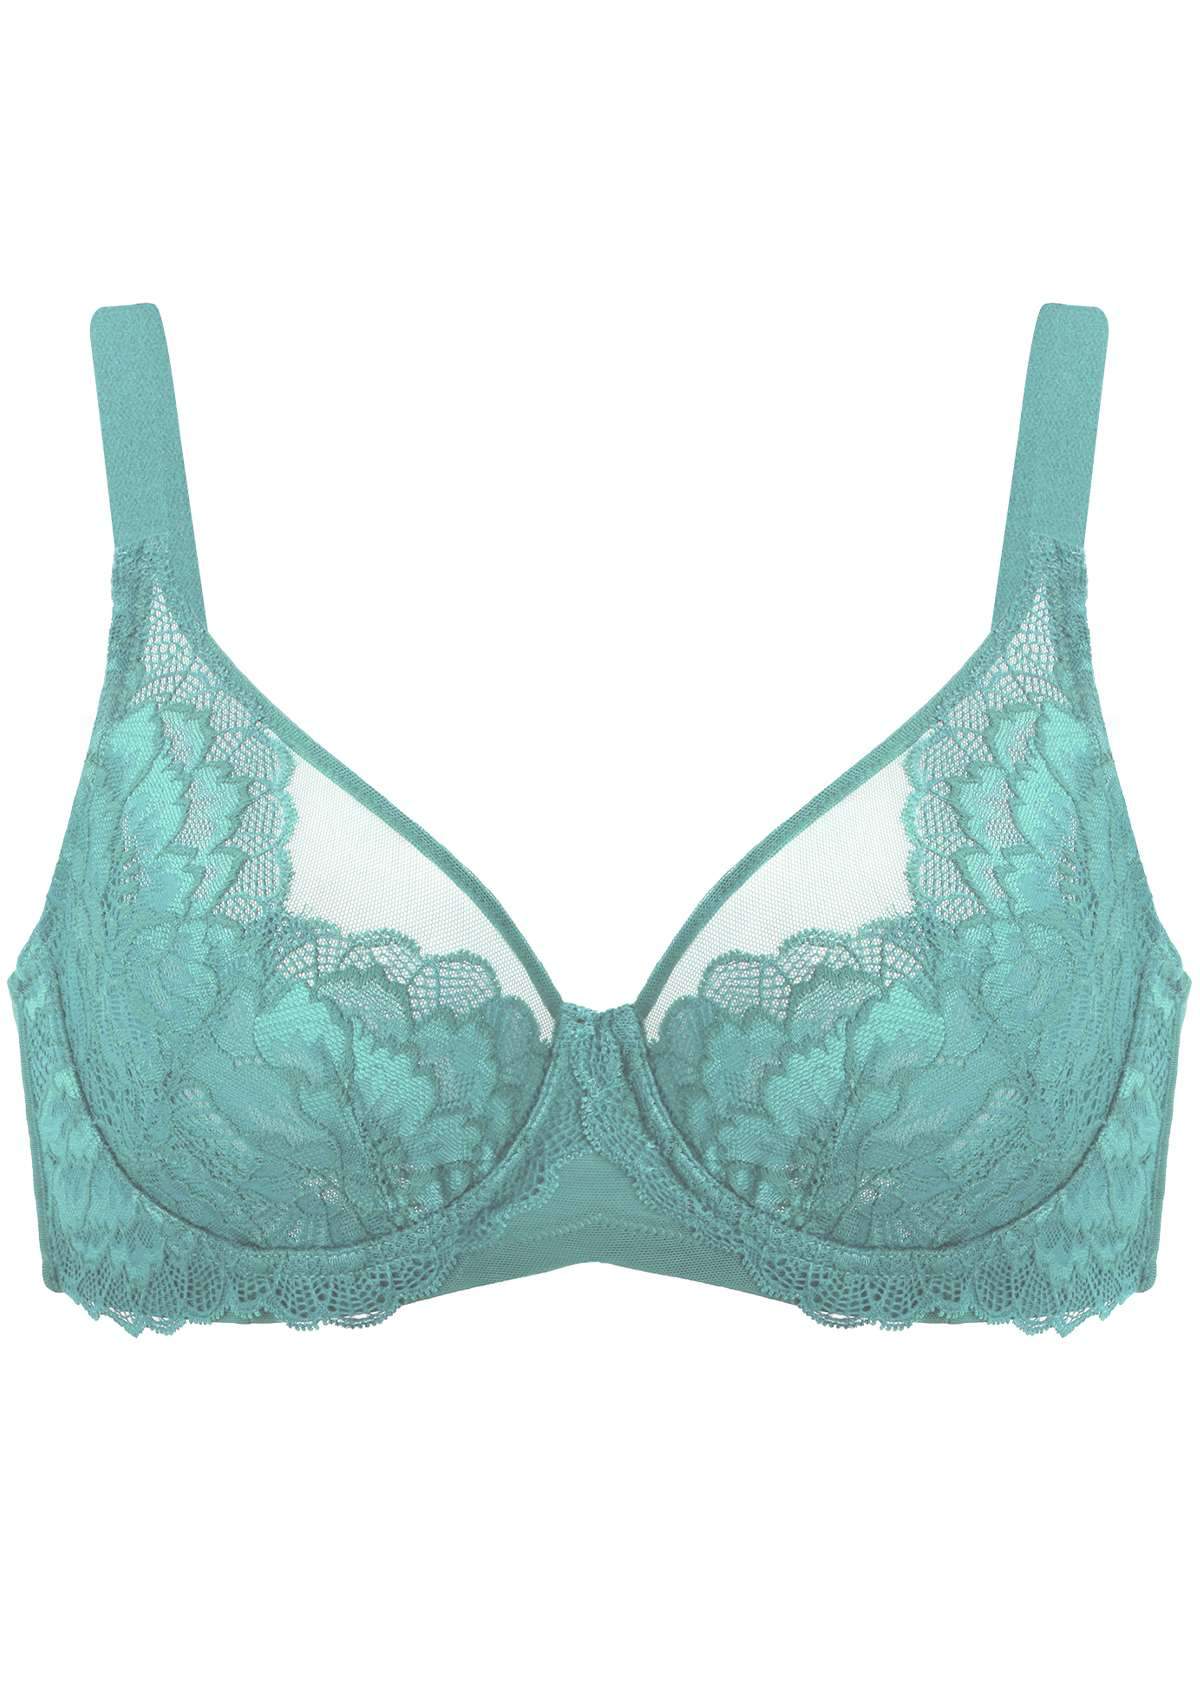 HSIA Paeonia Lace Full Coverage Underwire Non-Padded Uplifting Bra - Teal / 34 / DDD/F